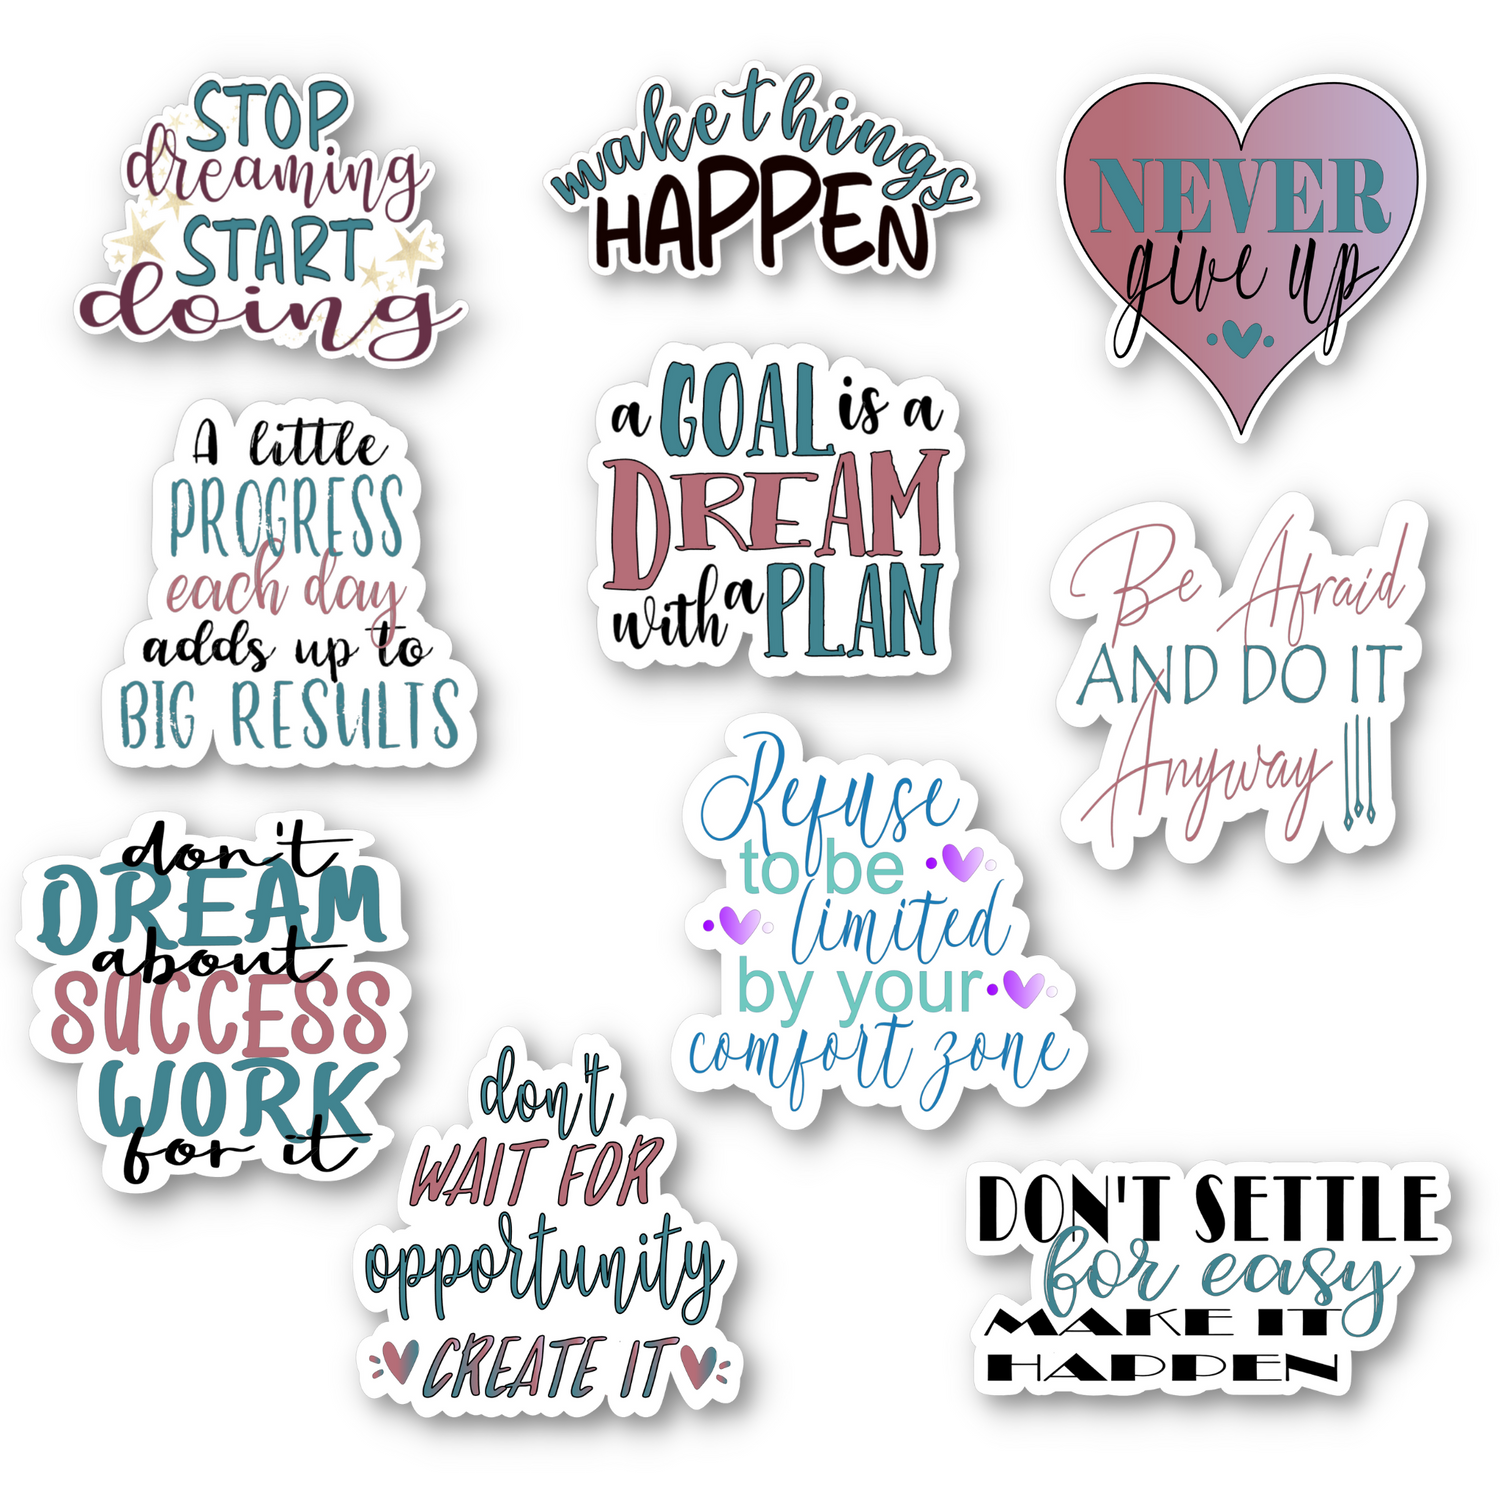 Success quotes sticker pack. Includes the following 10 stickers: 💠Refuse to be Limited by Your Comfort Zone 💠Don't Dream About Success Work For It 💠A Goal is a Dream With a Plan 💠A Little Progress Each Day Adds Up to Big Results 💠Make Things Happen 💠Be Afraid and Do It Anyway 💠Never Give Up 💠Stop Dreaming Start Doing 💠Don't Settle for Easy Make It Happen 💠Don't Wait for Opportunity Create It